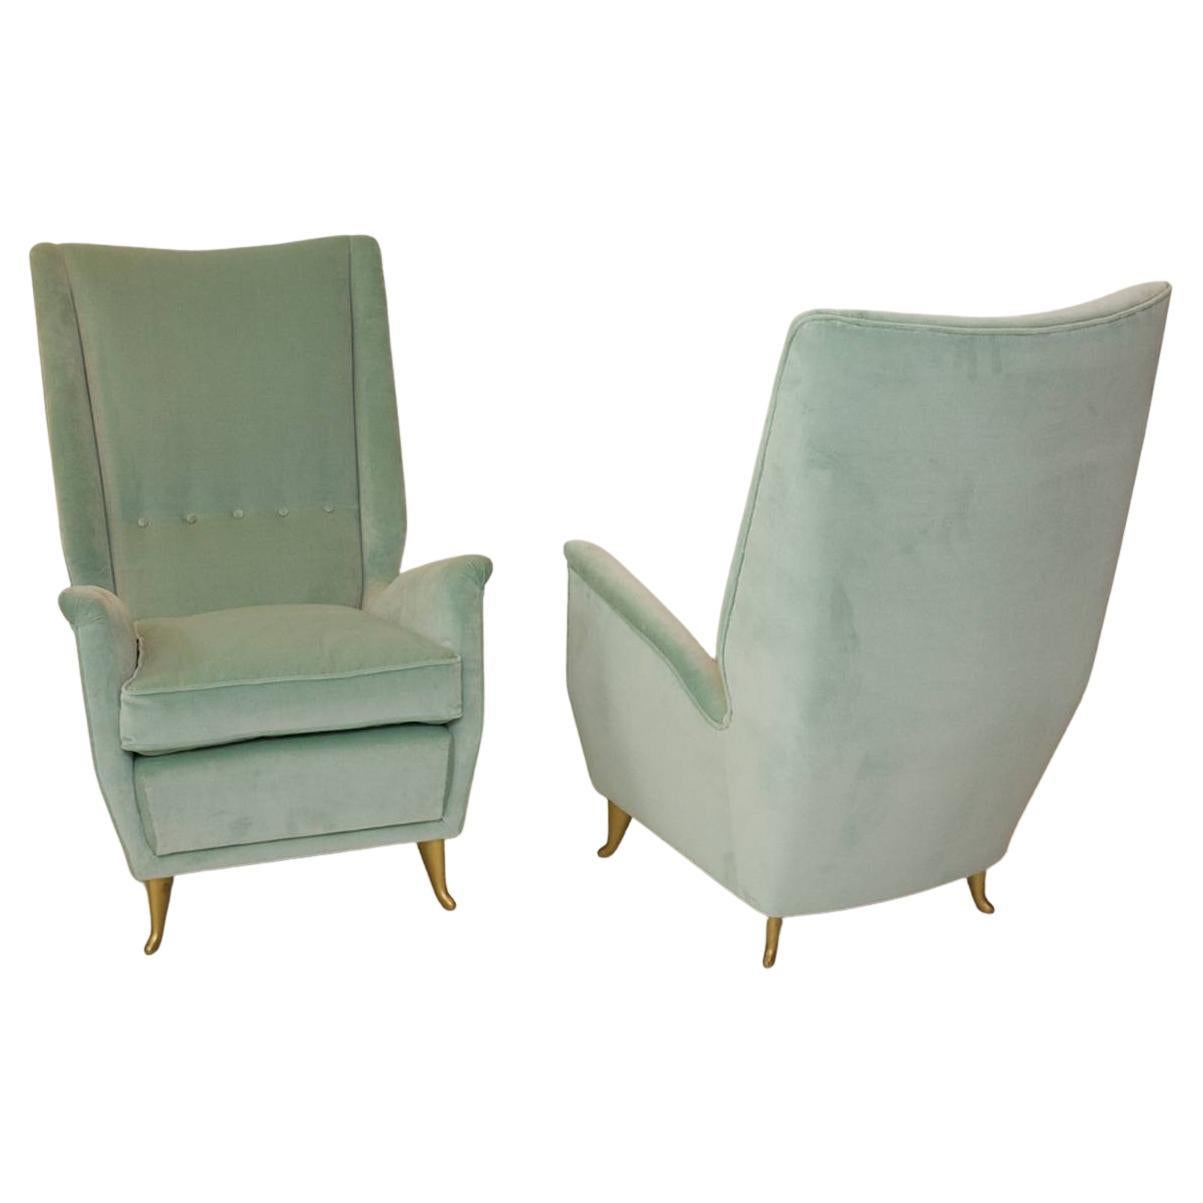 Pair of Mid-Century Modern Armchairs by ISA from a Design by Gio Ponti